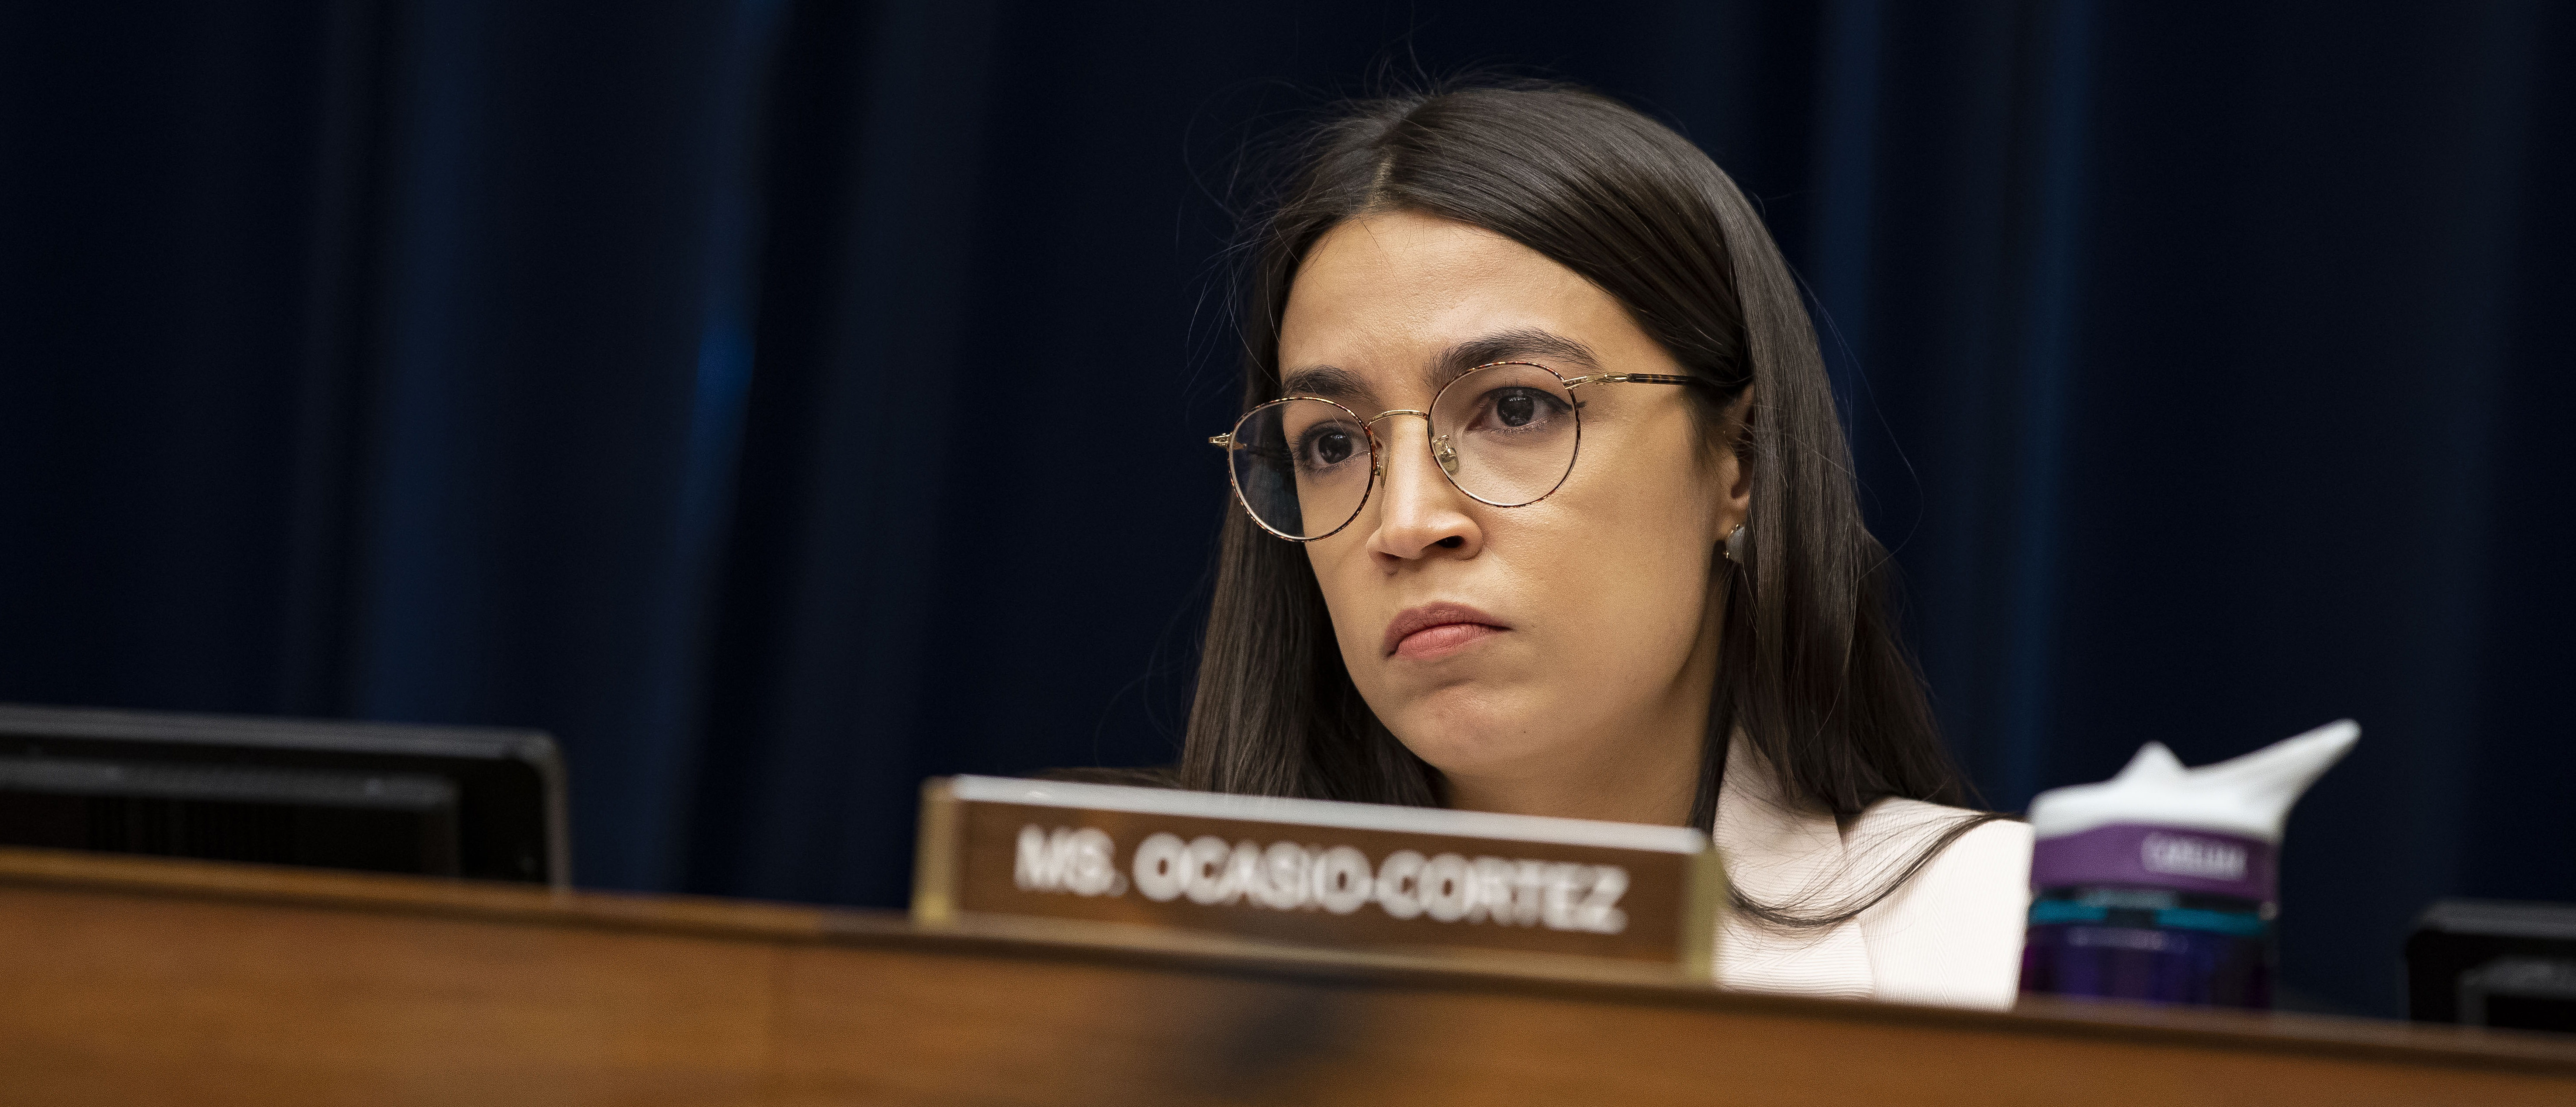 U.S. Rep. Alexandria Ocasio-Cortez listens during a House Civil Rights and Civil Liberties Subcommittee hearing on confronting white supremacy at the U.S. Capitol on May 15, 2019 in Washington, D.C. (Photo by Anna Moneymaker/Getty Images)